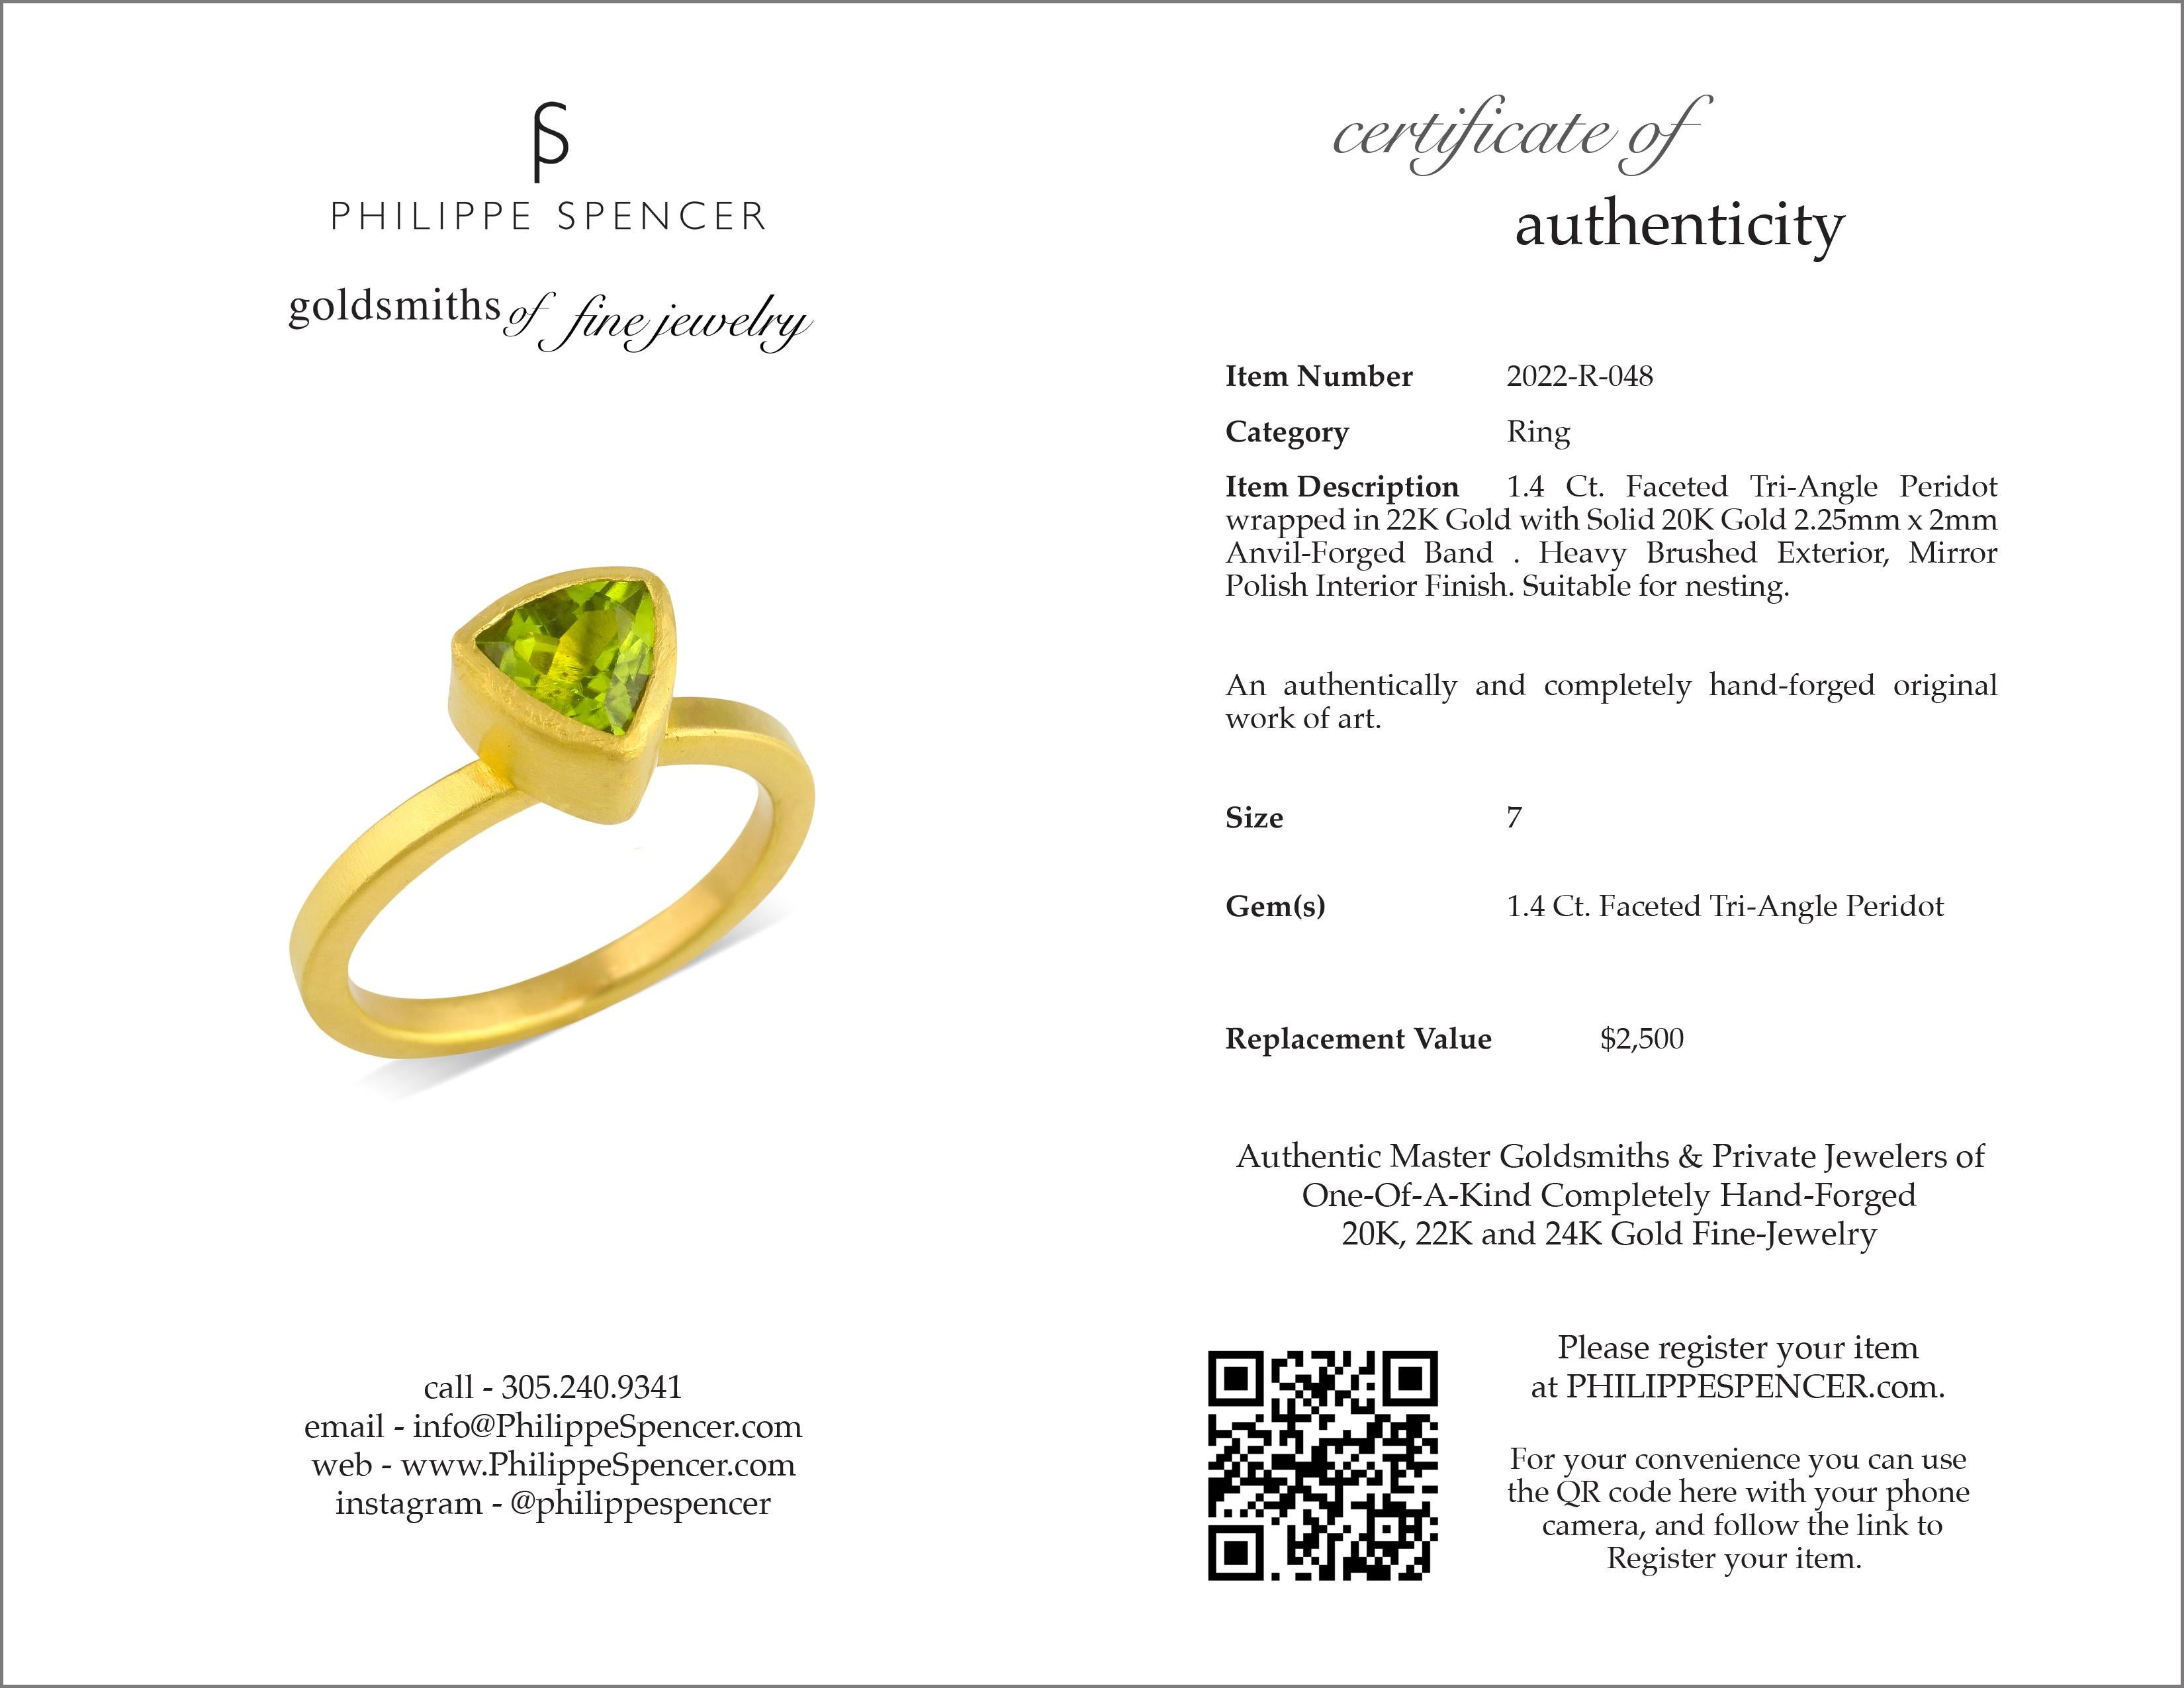 Artisan PHILIPPE SPENCER 1.4 Ct. Peridot in 22K and 20K Gold Solitaire Ring For Sale